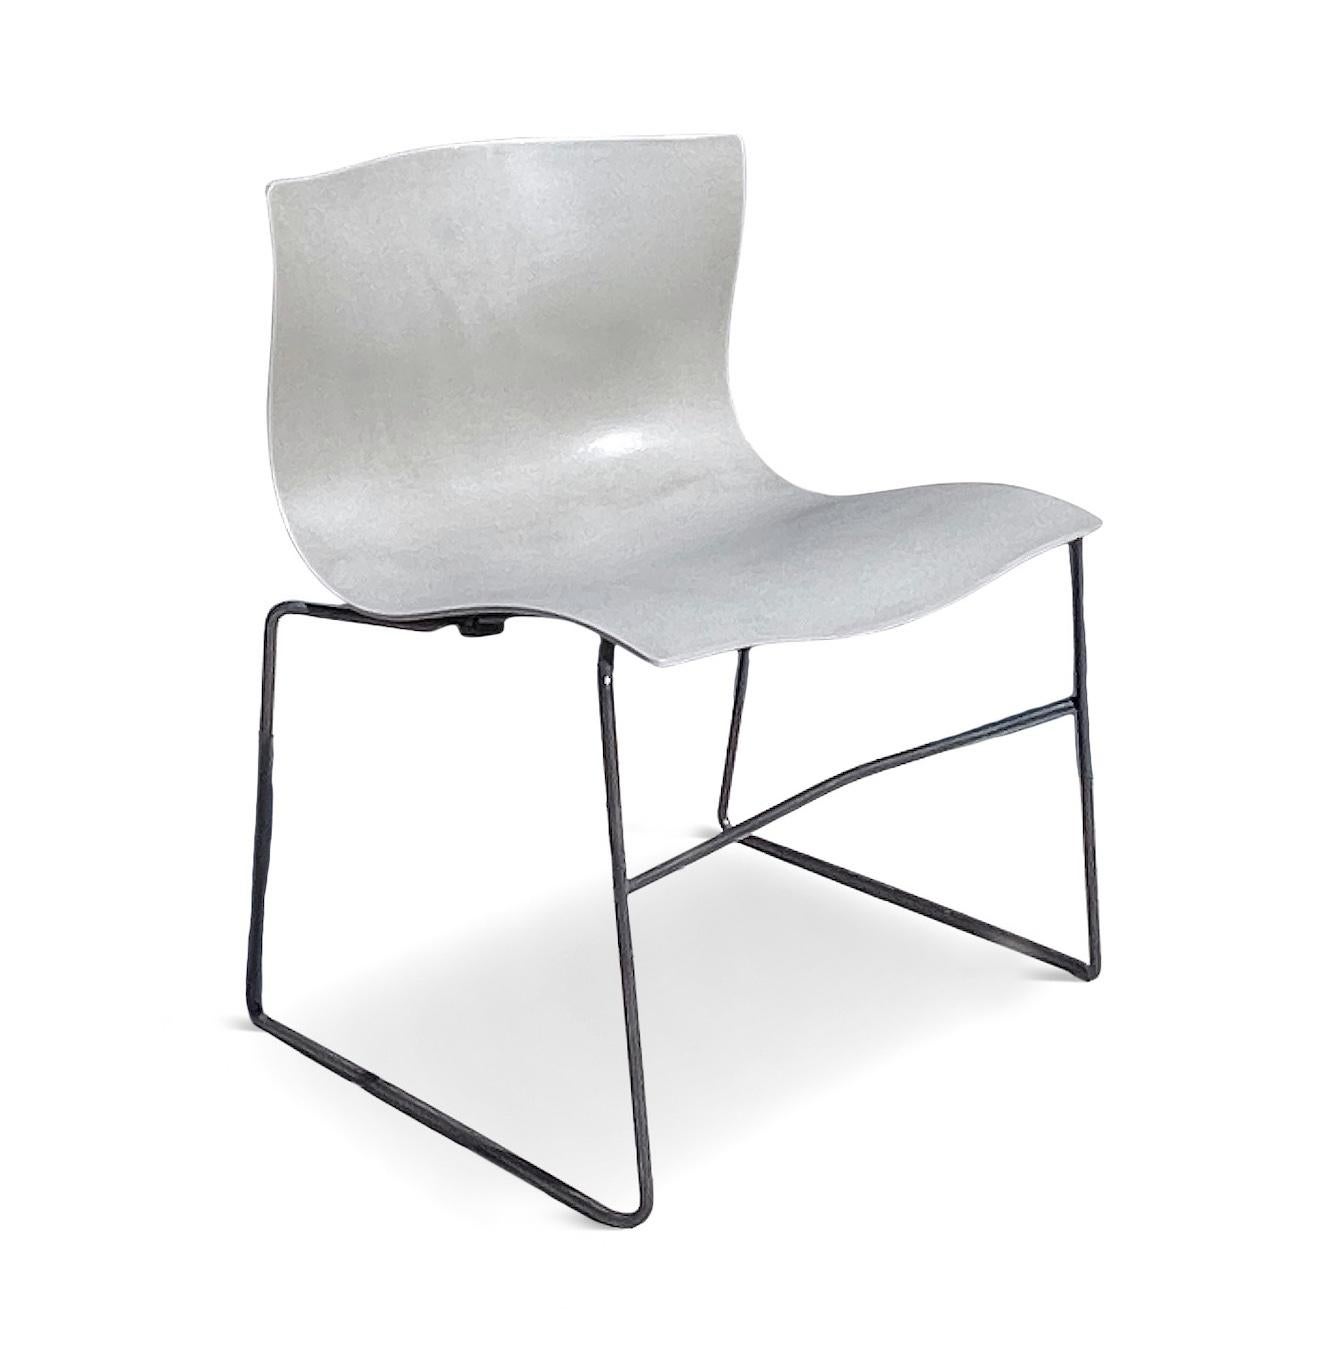 Metal Set of 5 Grey Handkerchief Chairs by Lella and Massimo Vignelli for Knoll